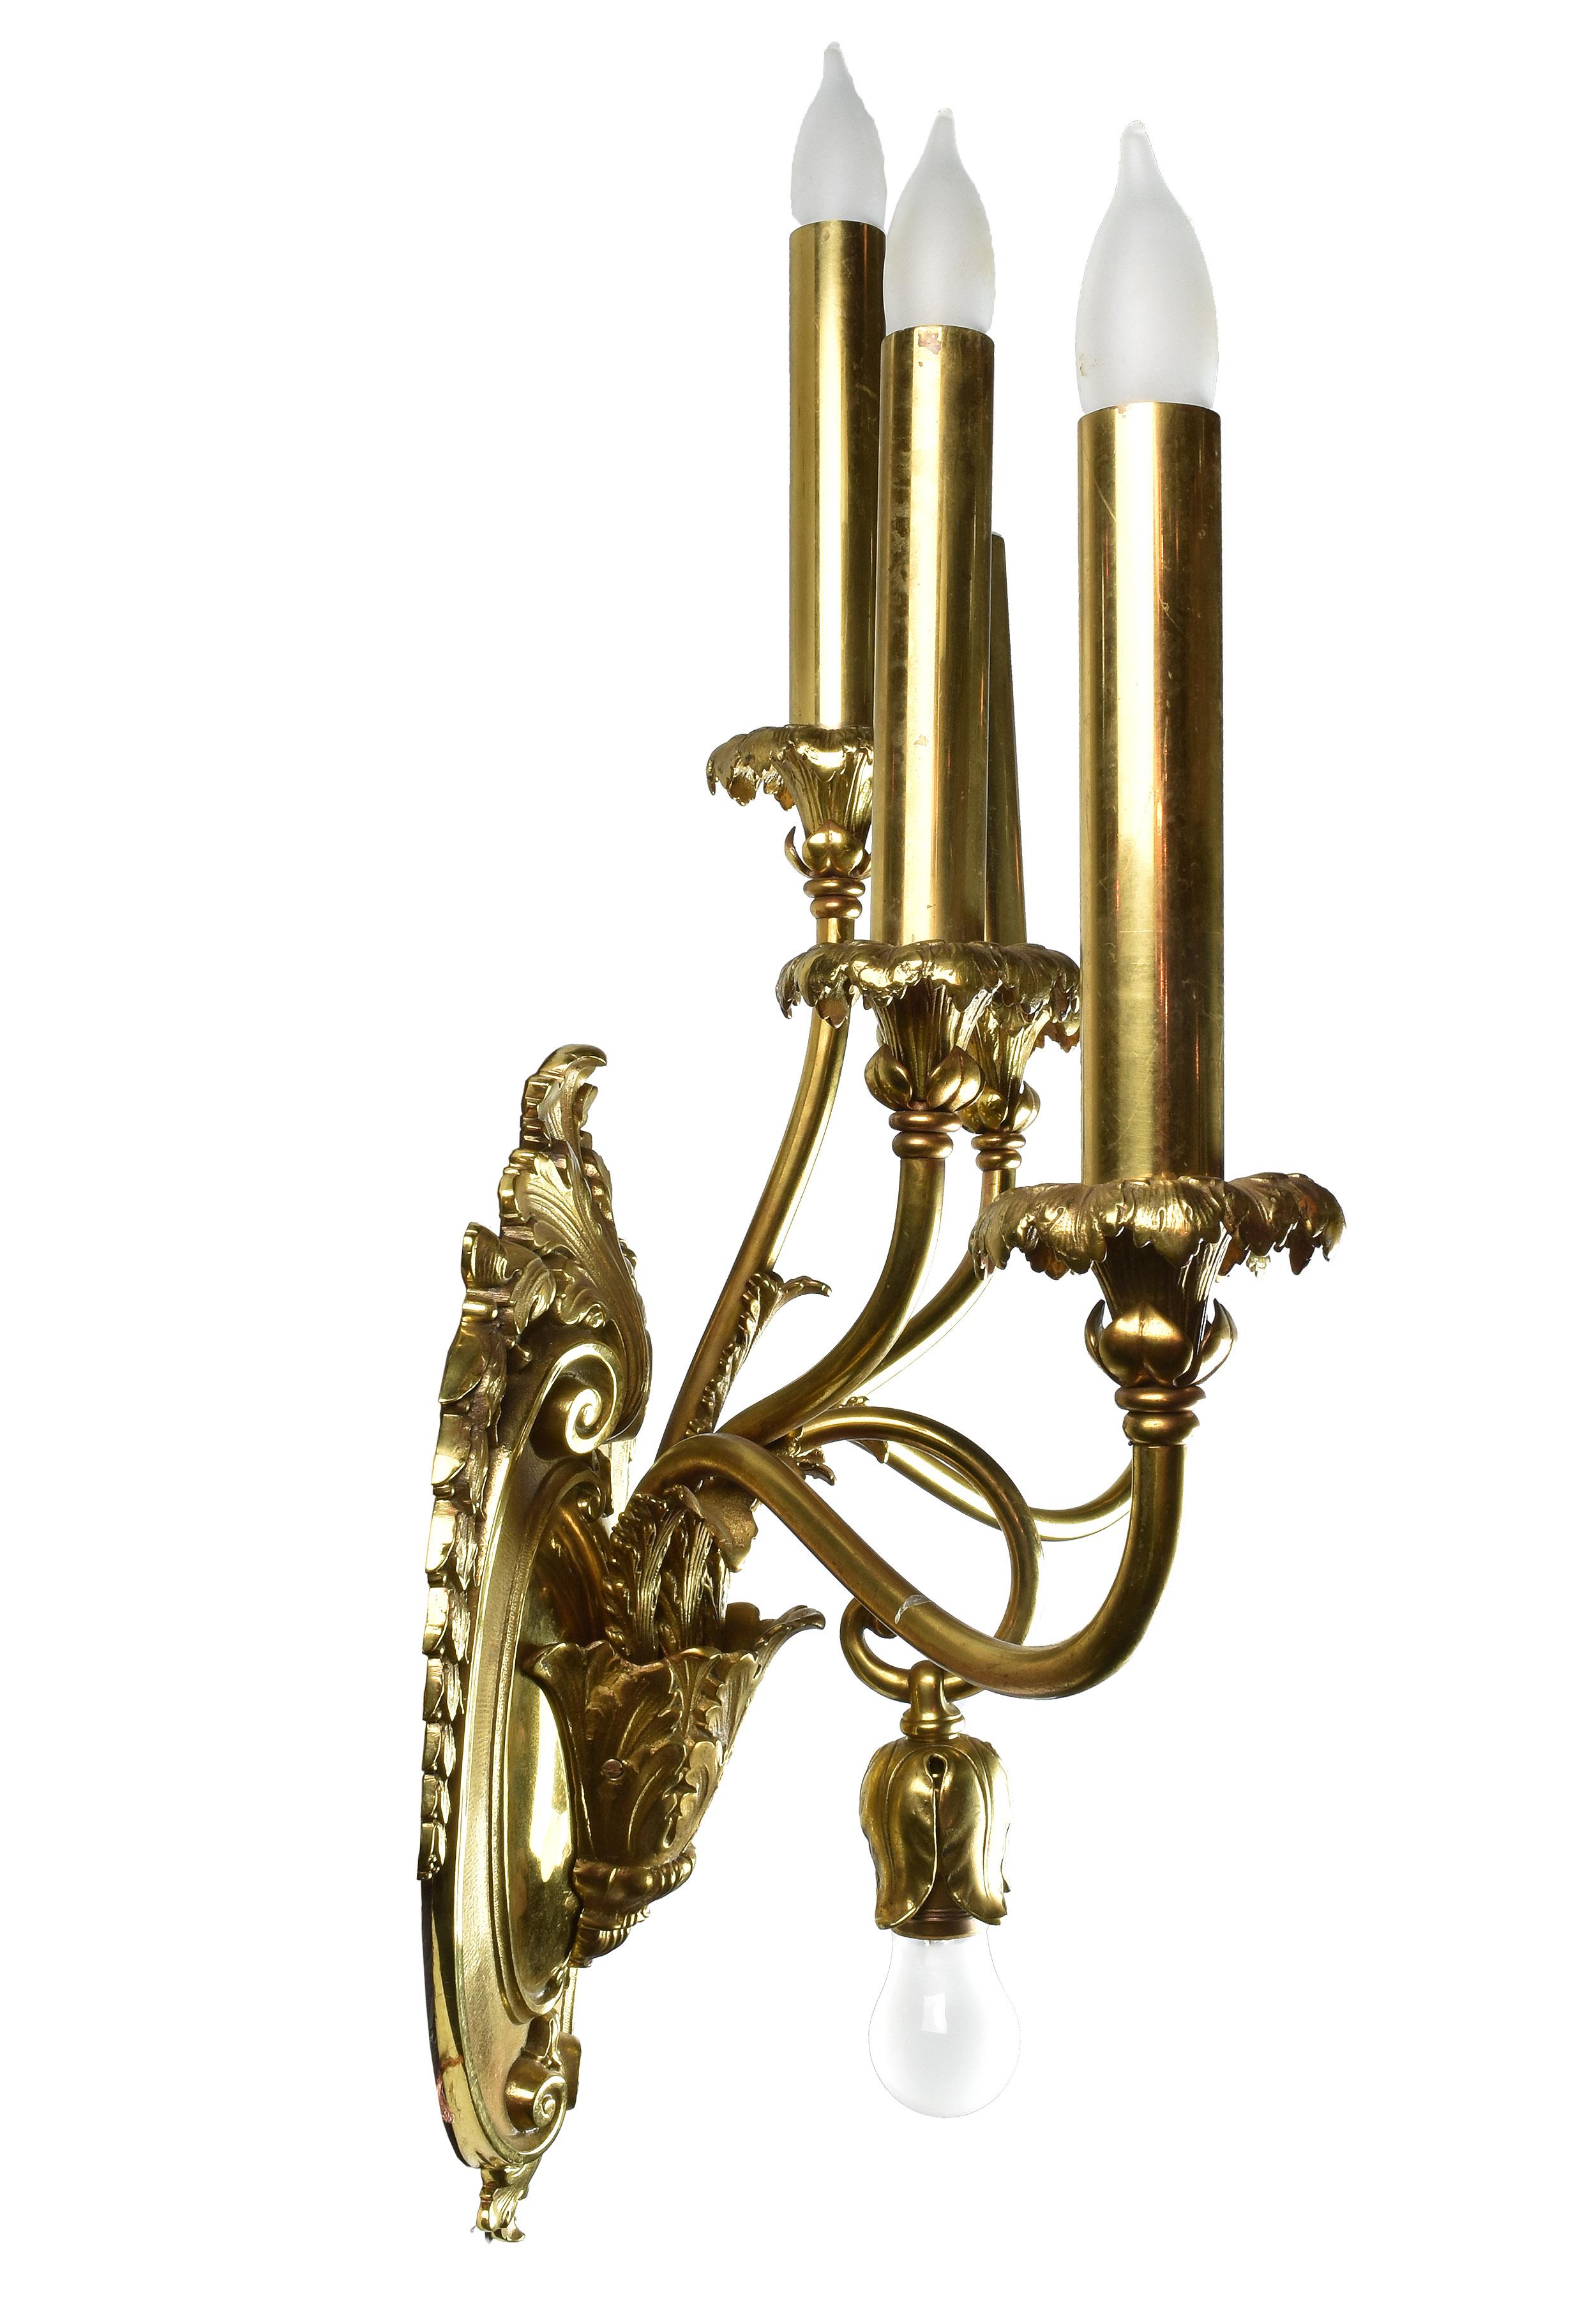 This finely crafted pair of oversized brass sconces features intricately detailed floral accents within the brass, 5 looping candle arms and an additional upside-down hanging bulb within the center of the fixture.